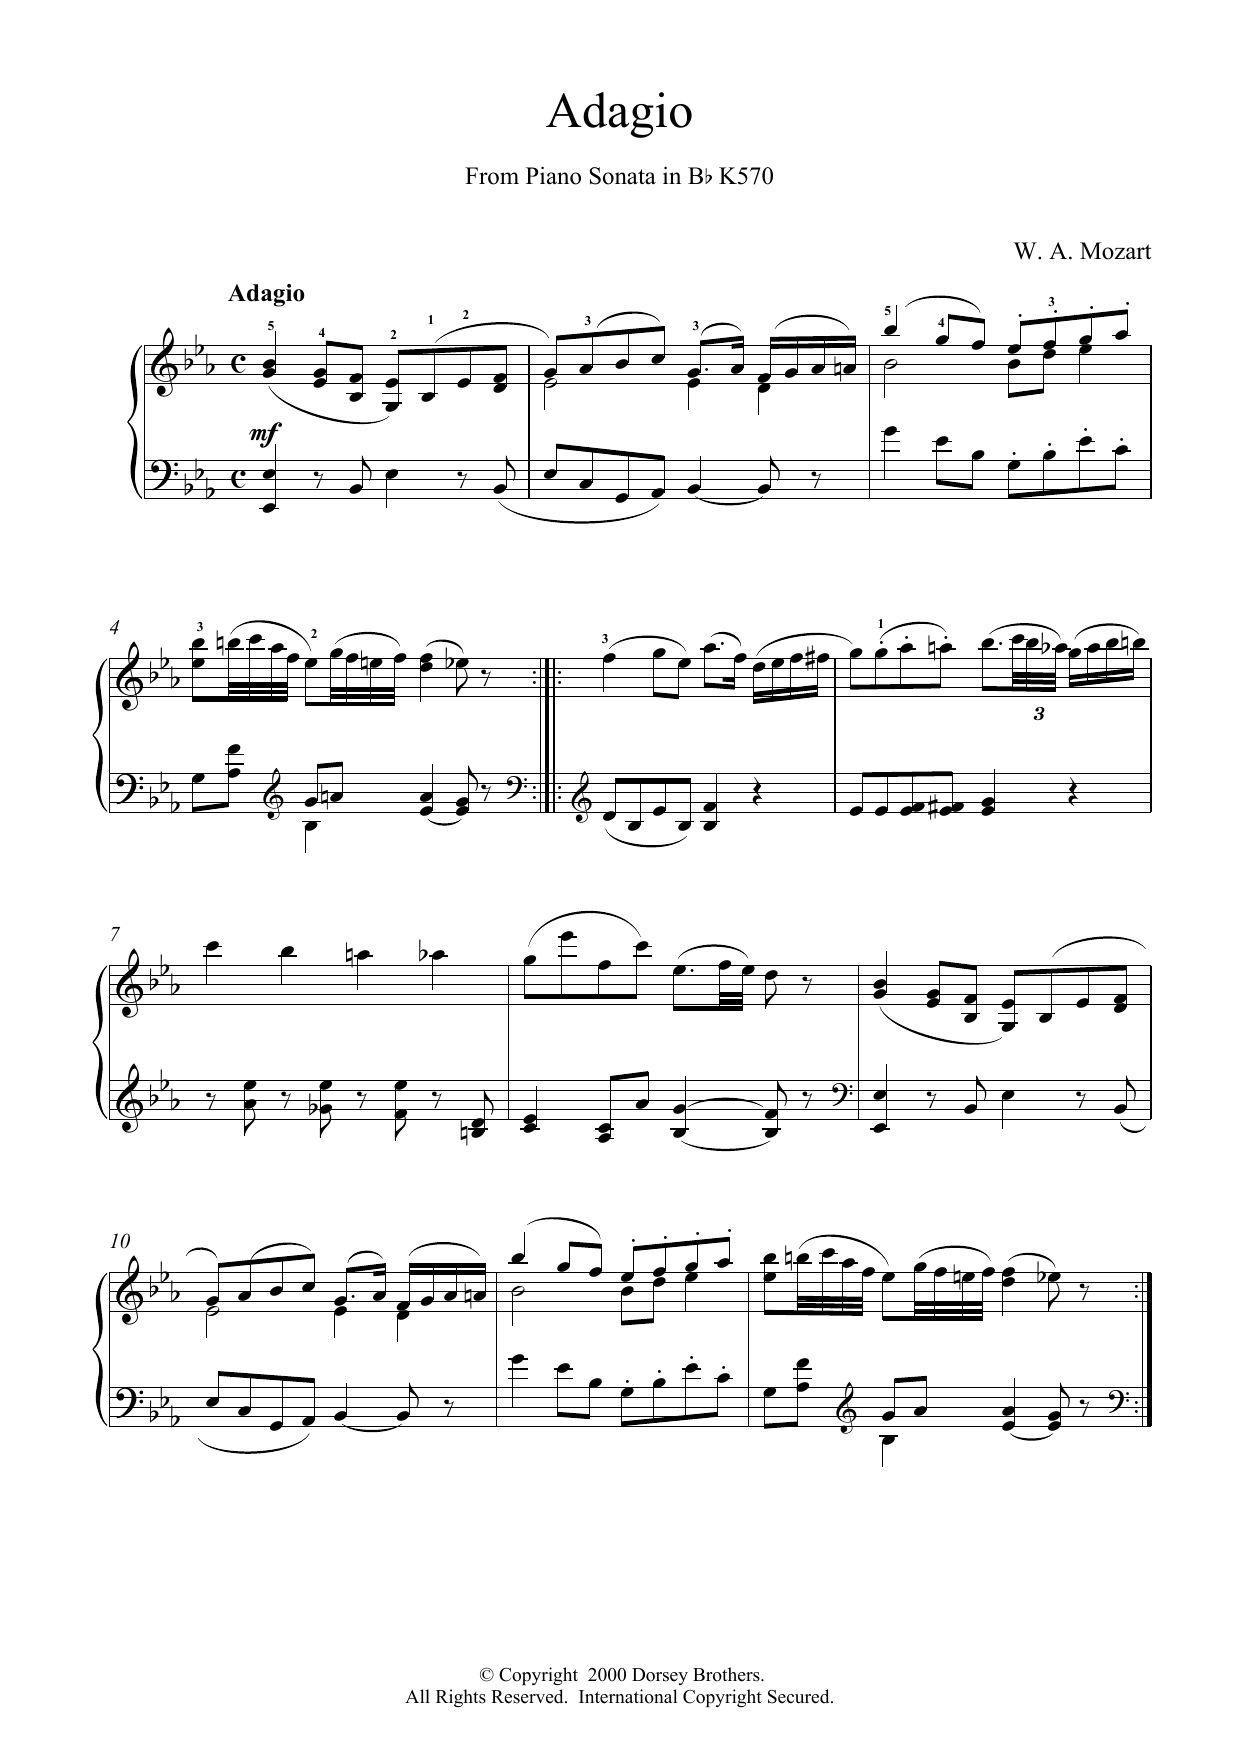 Wolfgang Amadeus Mozart Adagio from Piano Sonata in Bb, K570 sheet music notes and chords. Download Printable PDF.